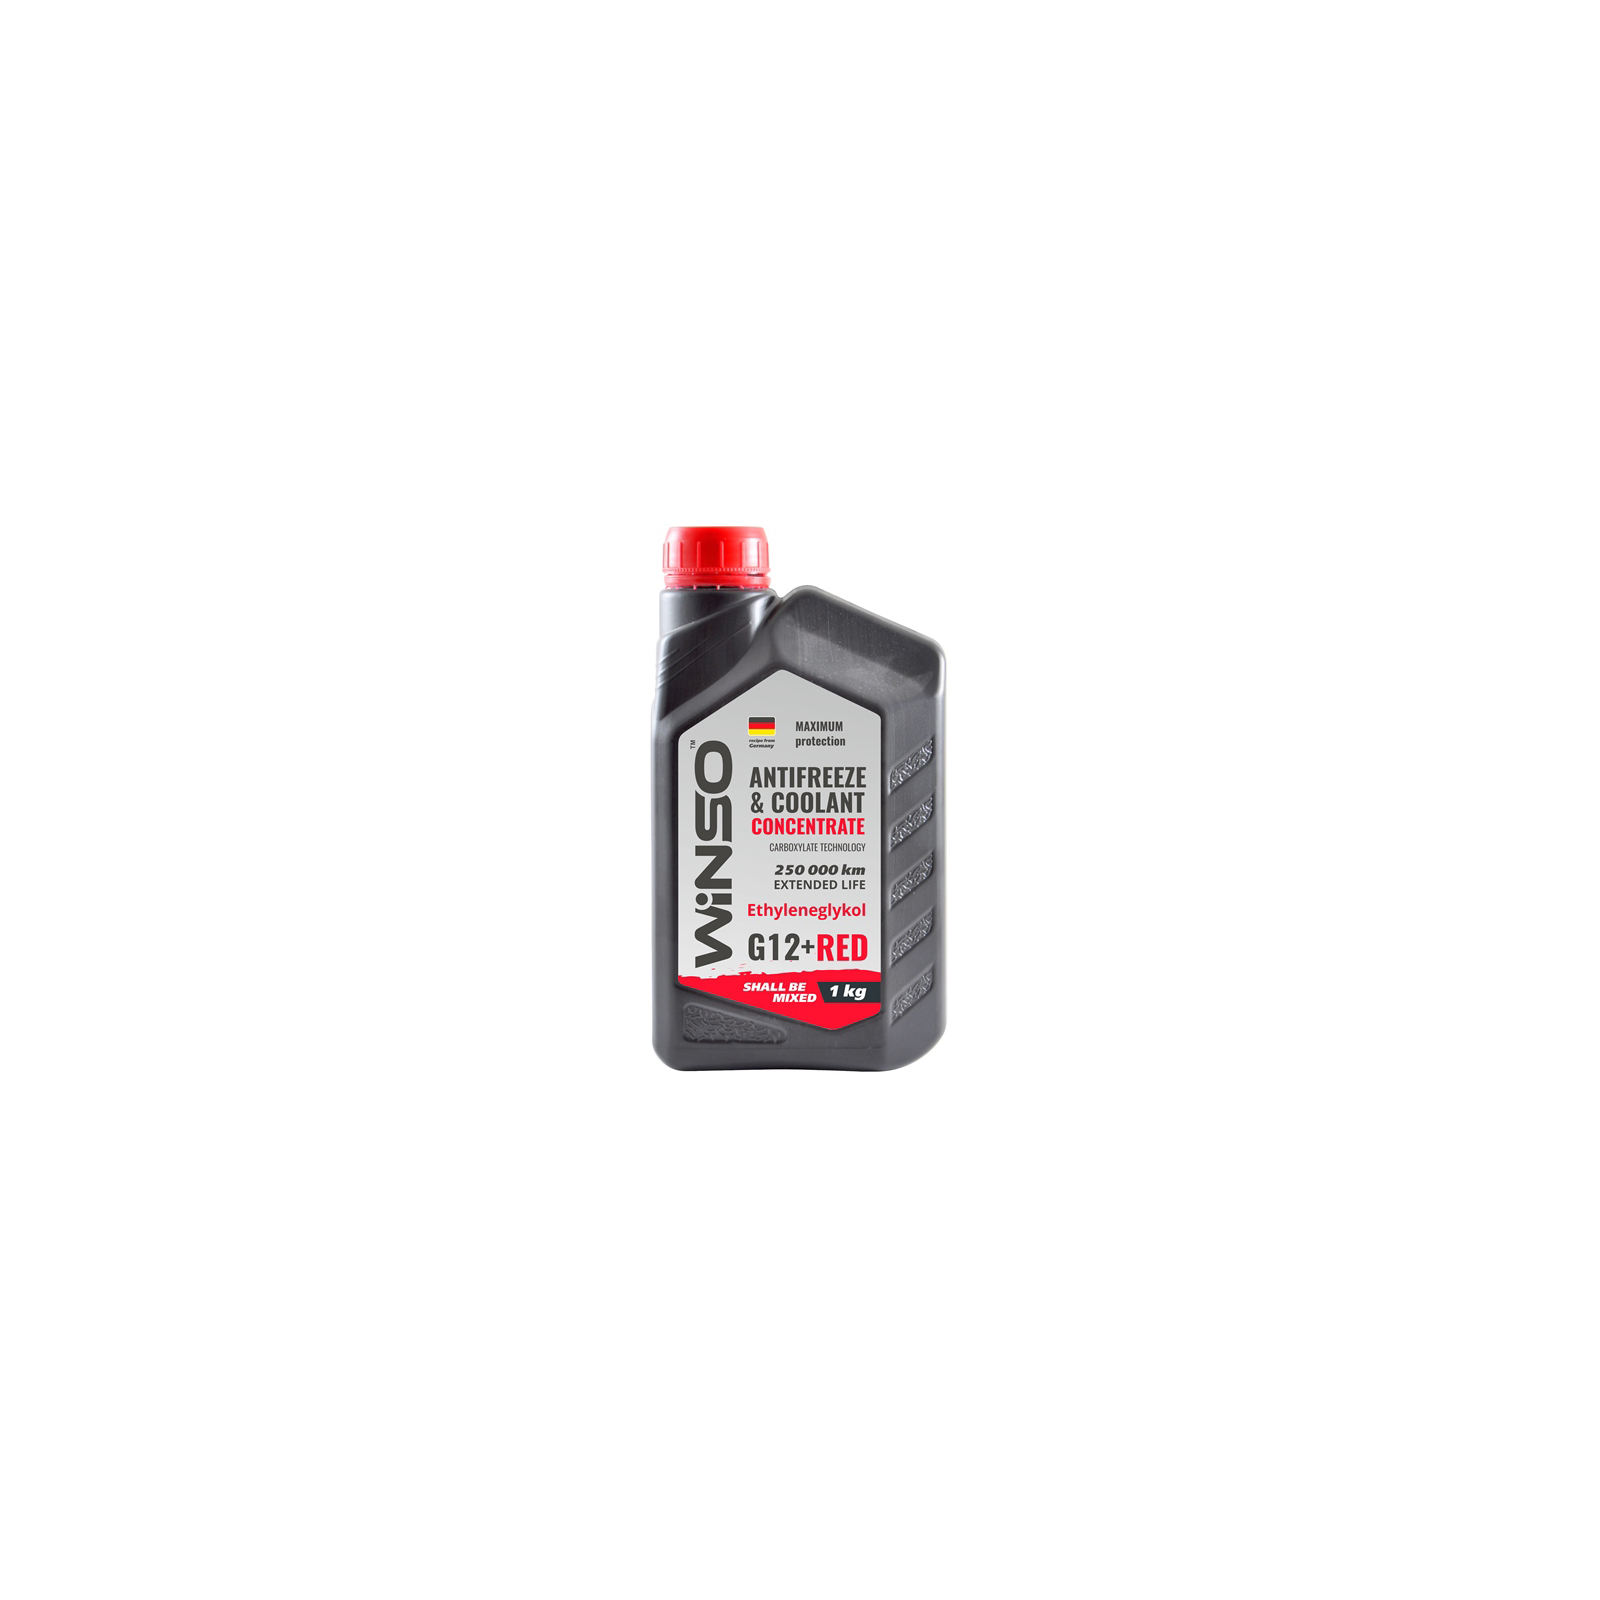 Антифриз WINSO COOLANT CONCENTRATE WINSO RED G 12+ концентрат 1kg (881000)